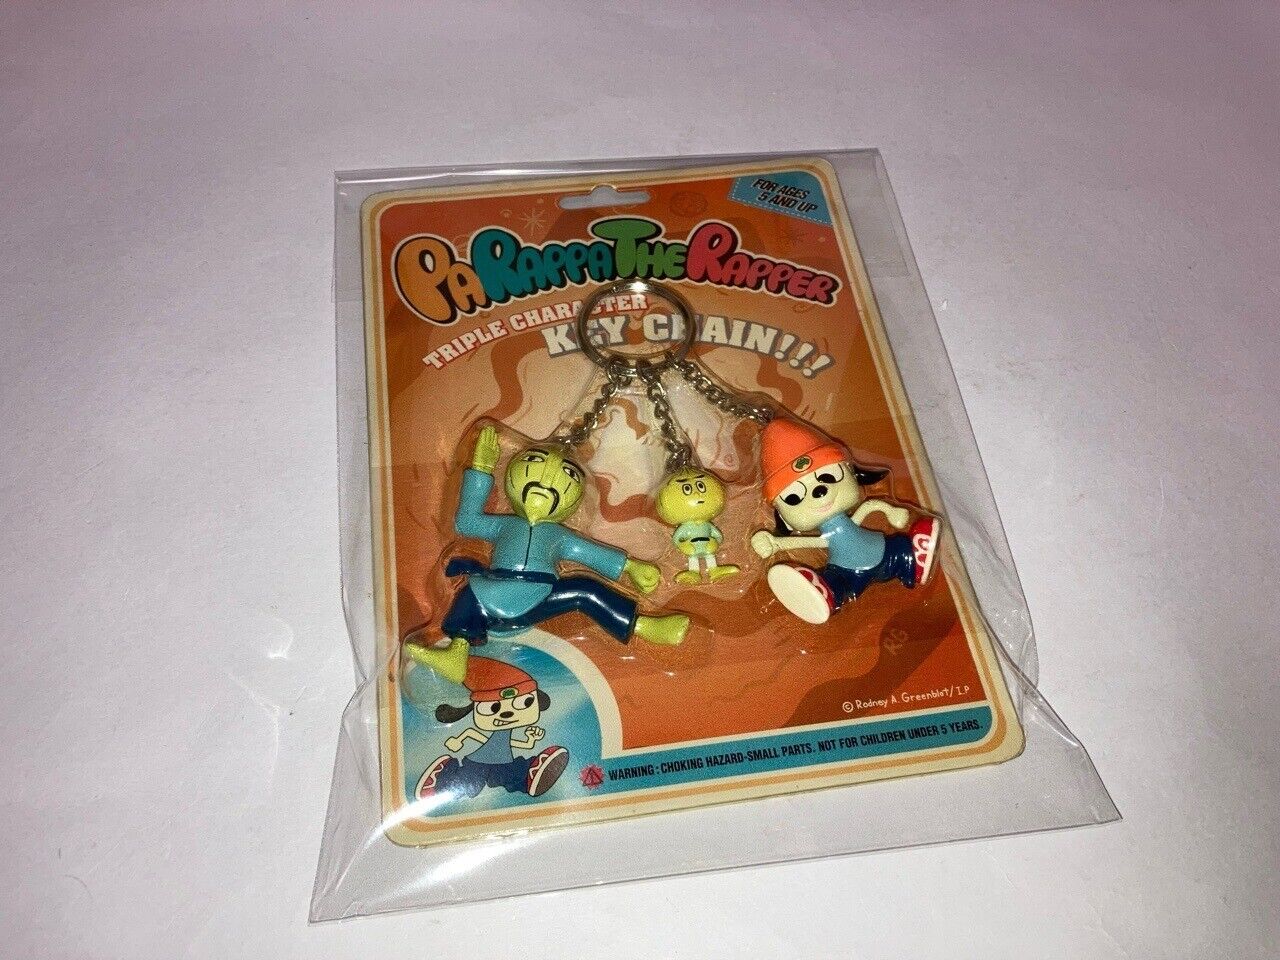 New PaRappa the Rapper 3 Type Keychain pack Sony PS In Stock B Japan import